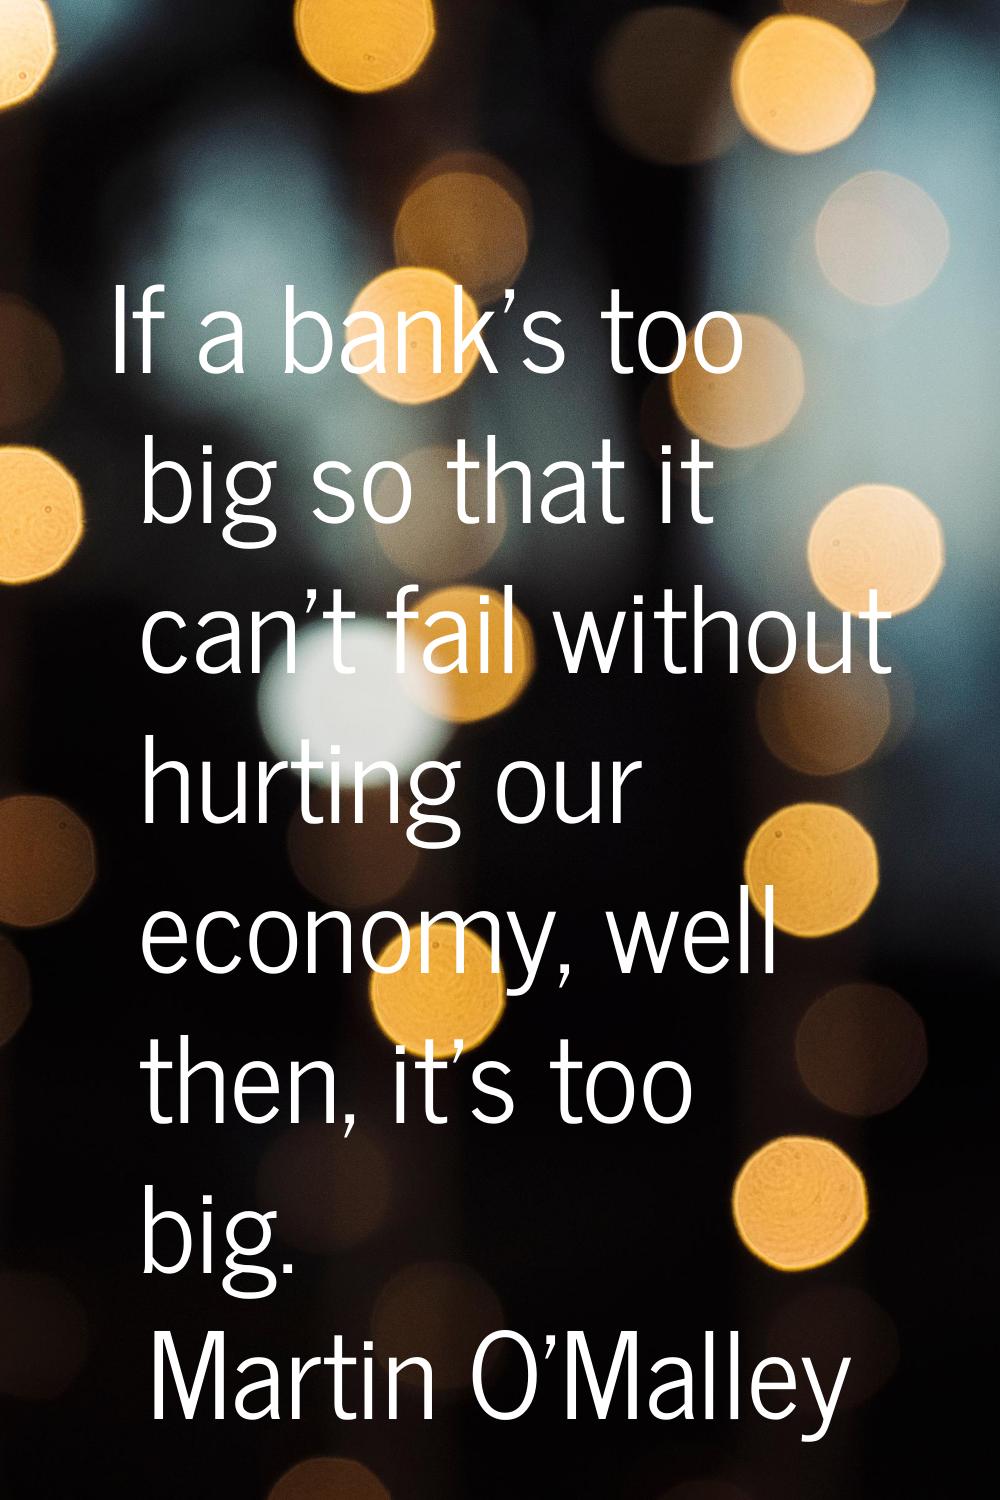 If a bank's too big so that it can't fail without hurting our economy, well then, it's too big.